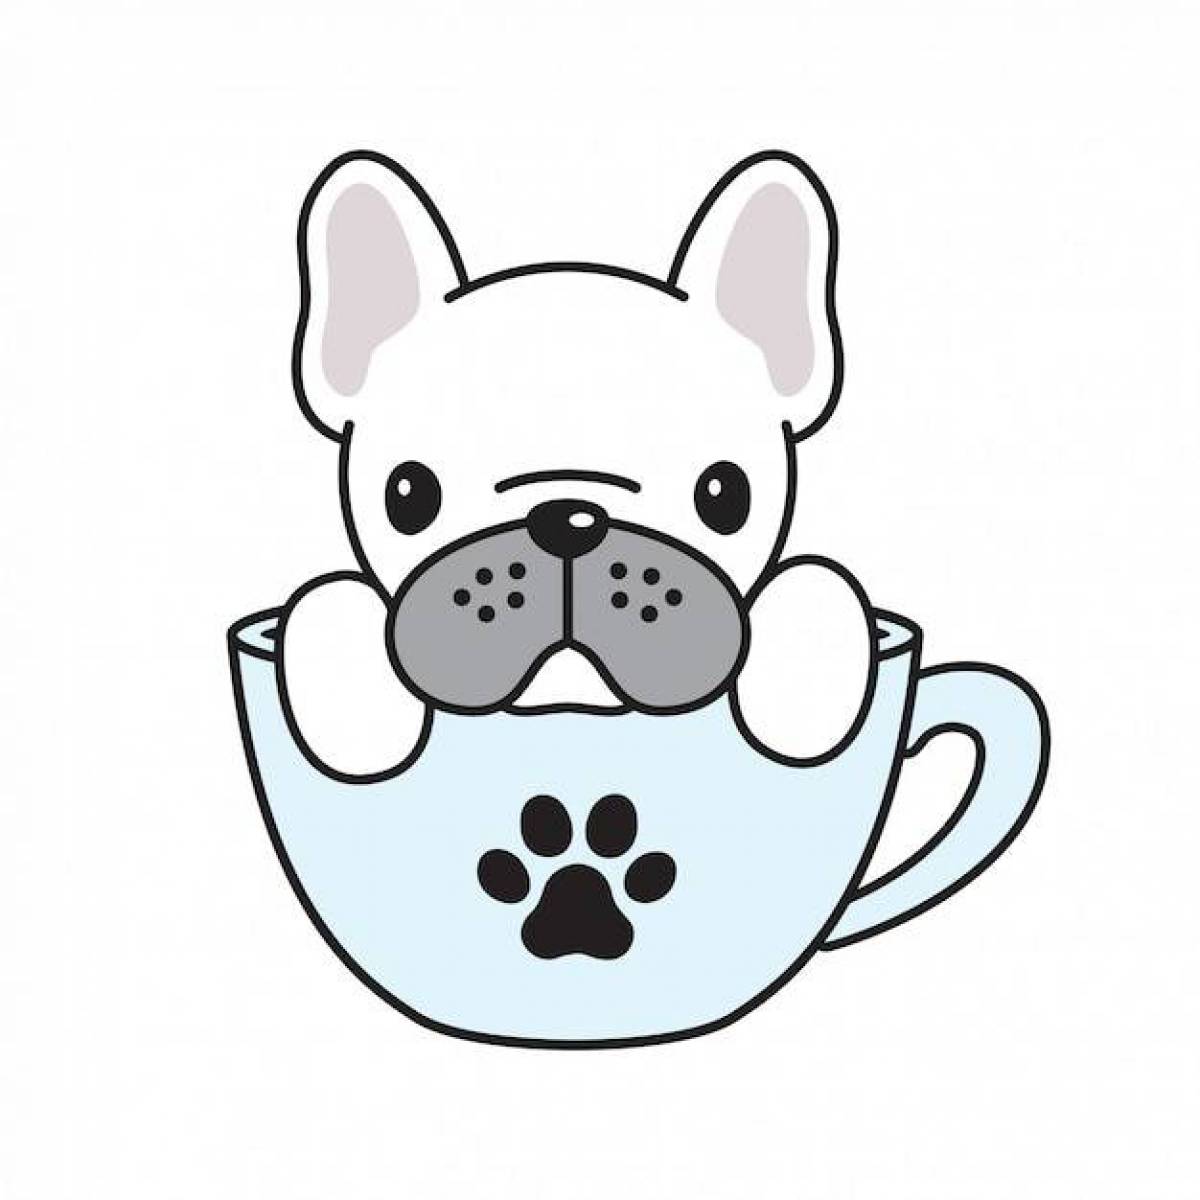 Courageous french bulldog coloring page